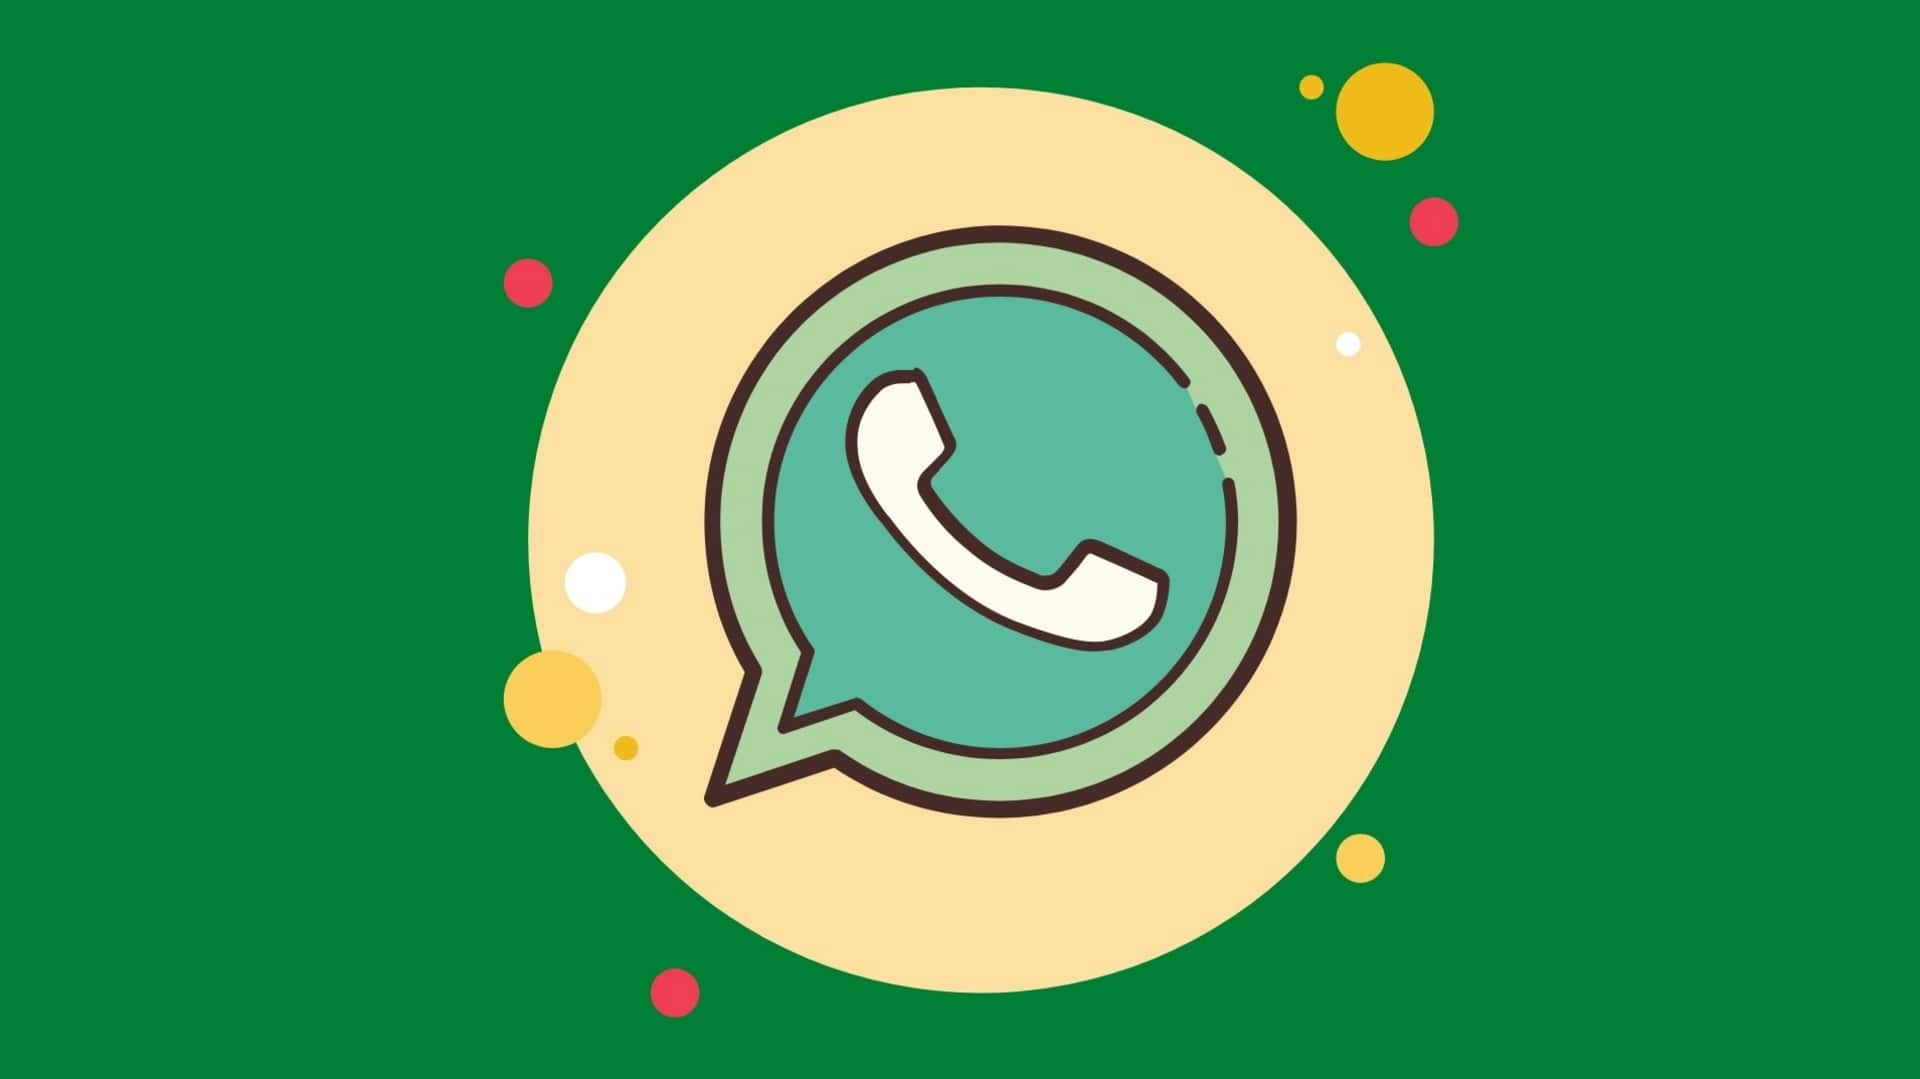 WhatsApp beta for Android adds profile info in chats